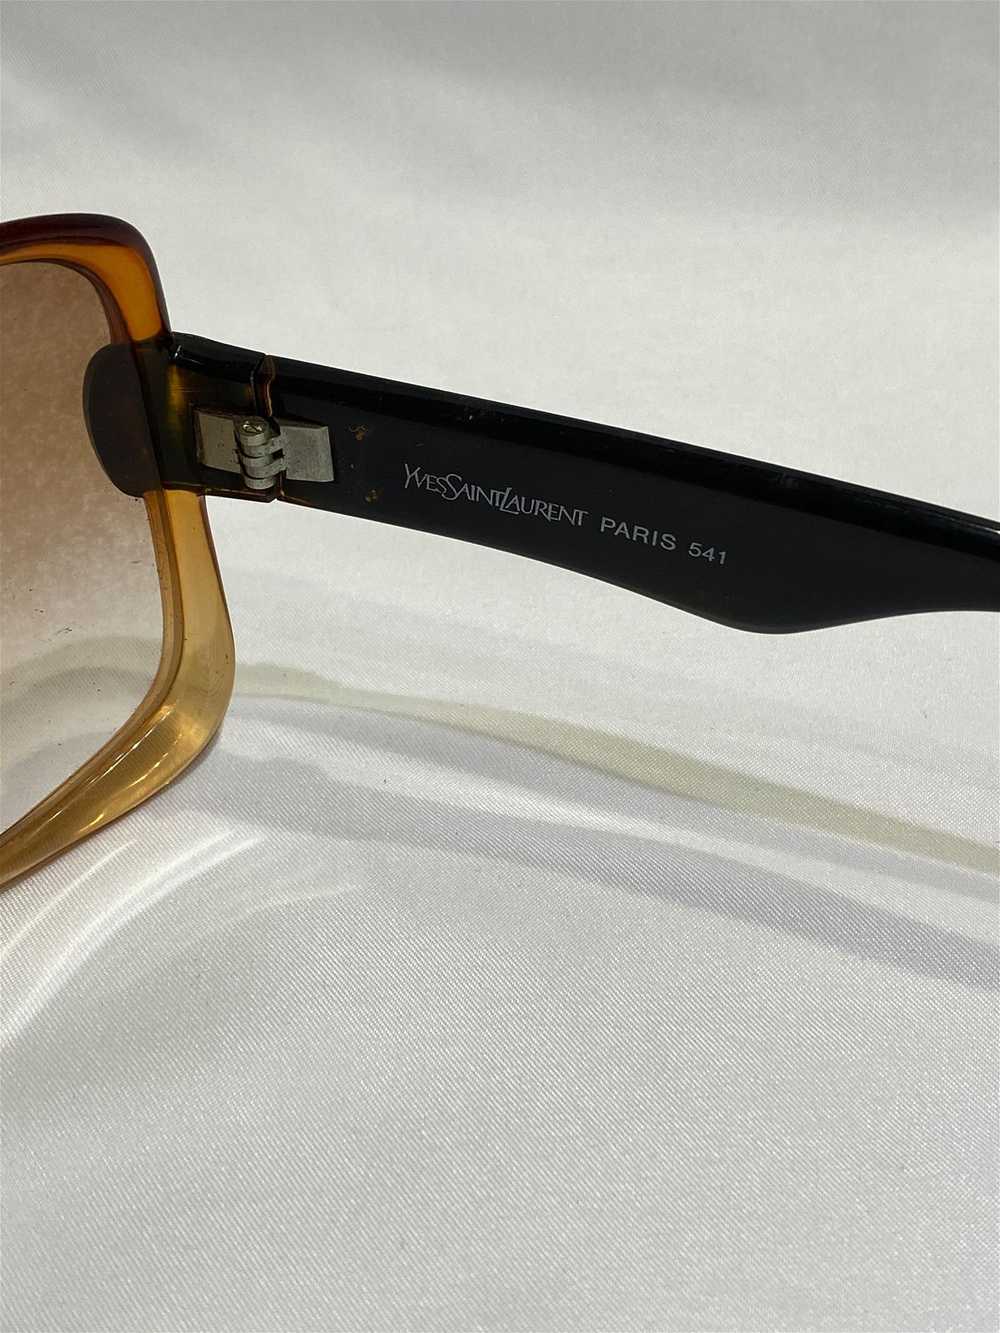 Vintage YSL Brown and Black Square Sunglasses - image 6